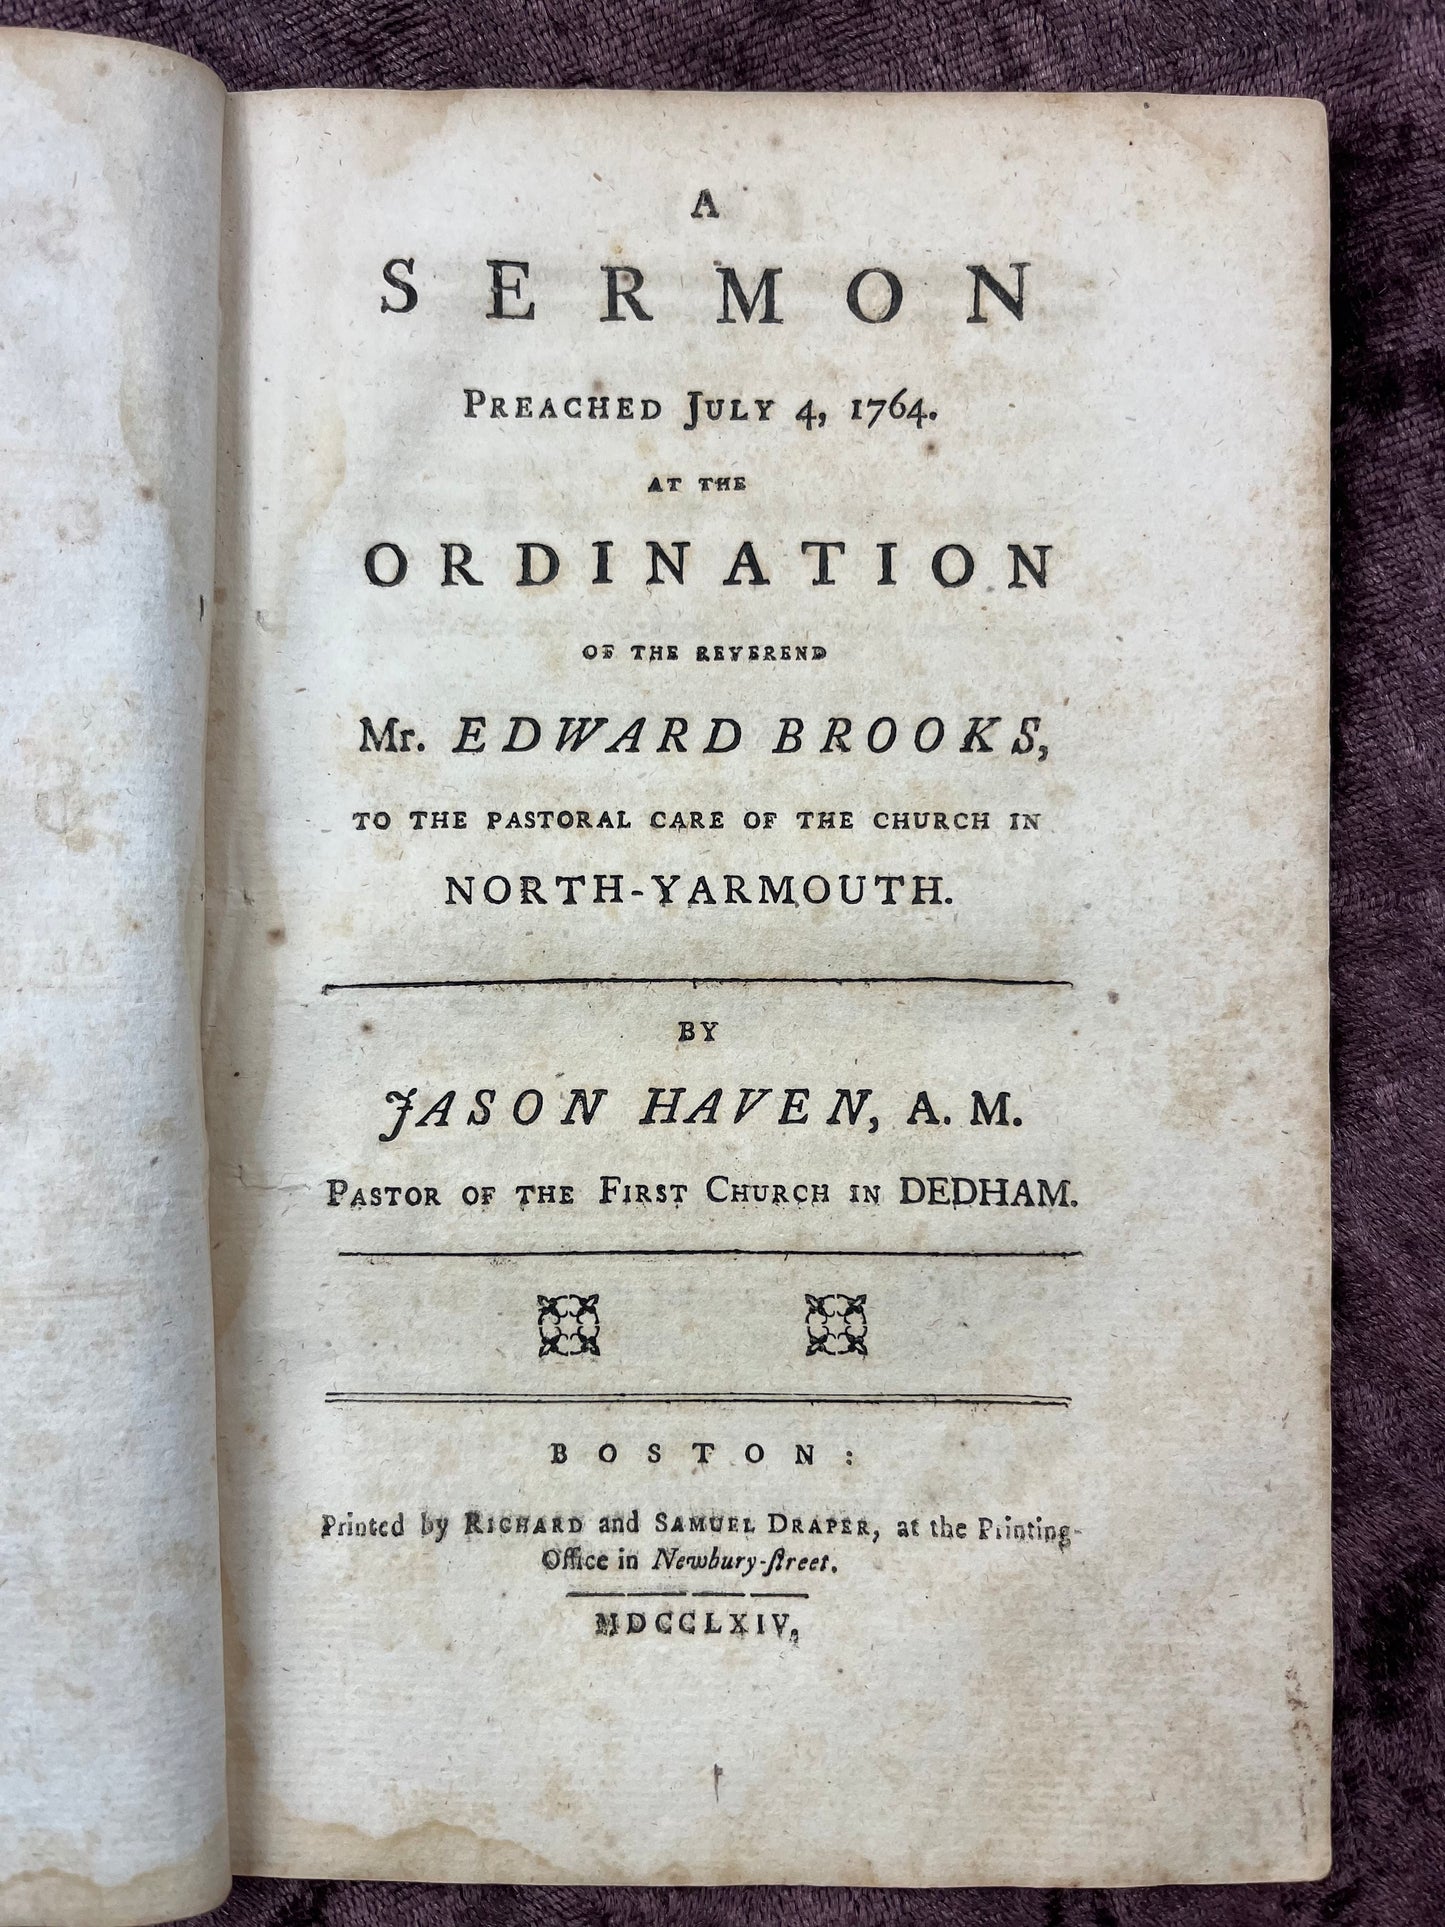 1764 Octavo Pamphlet Sermon Preached At The Ordination Of Reverend Mr. Edward Brooks To The Pastoral Care Of The Church In North Yarmouth By Jason Haven